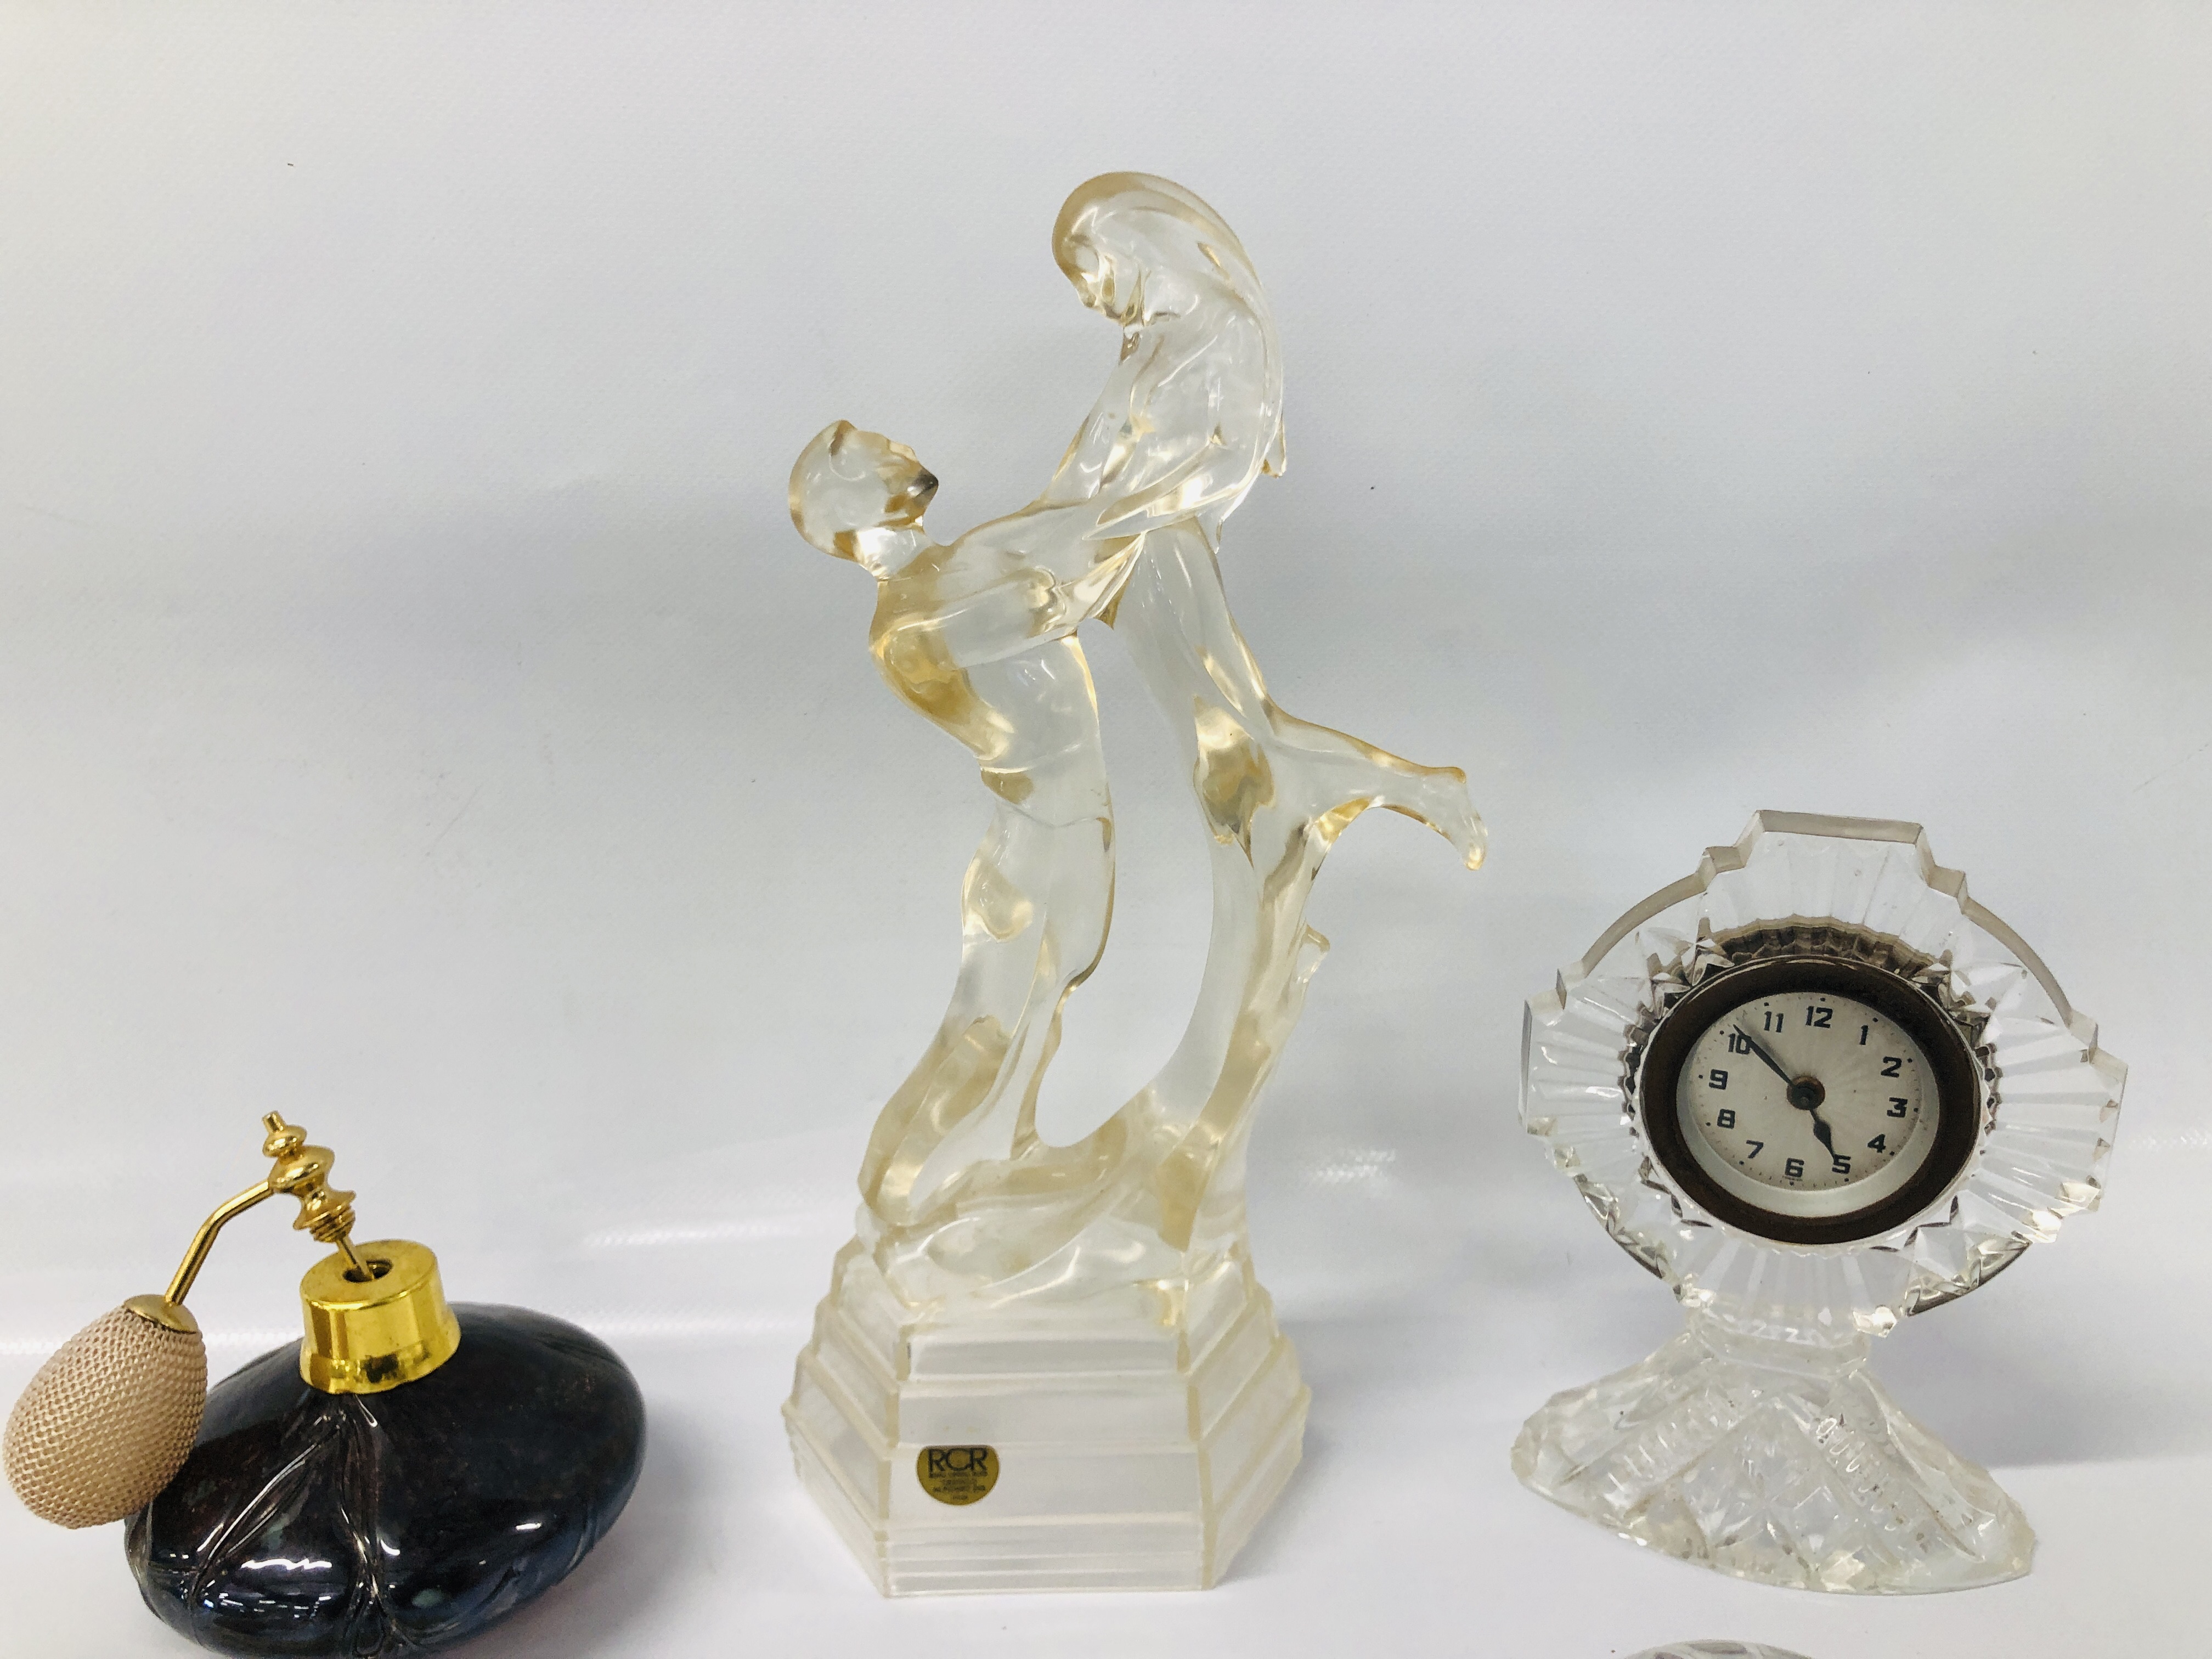 6 X ASSORTED PERFUME BOTTLES, RCR CRYSTAL DANCING GROUP, VINTAGE GLASS DRESSING TABLE CLOCK, ETC. - Image 10 of 12